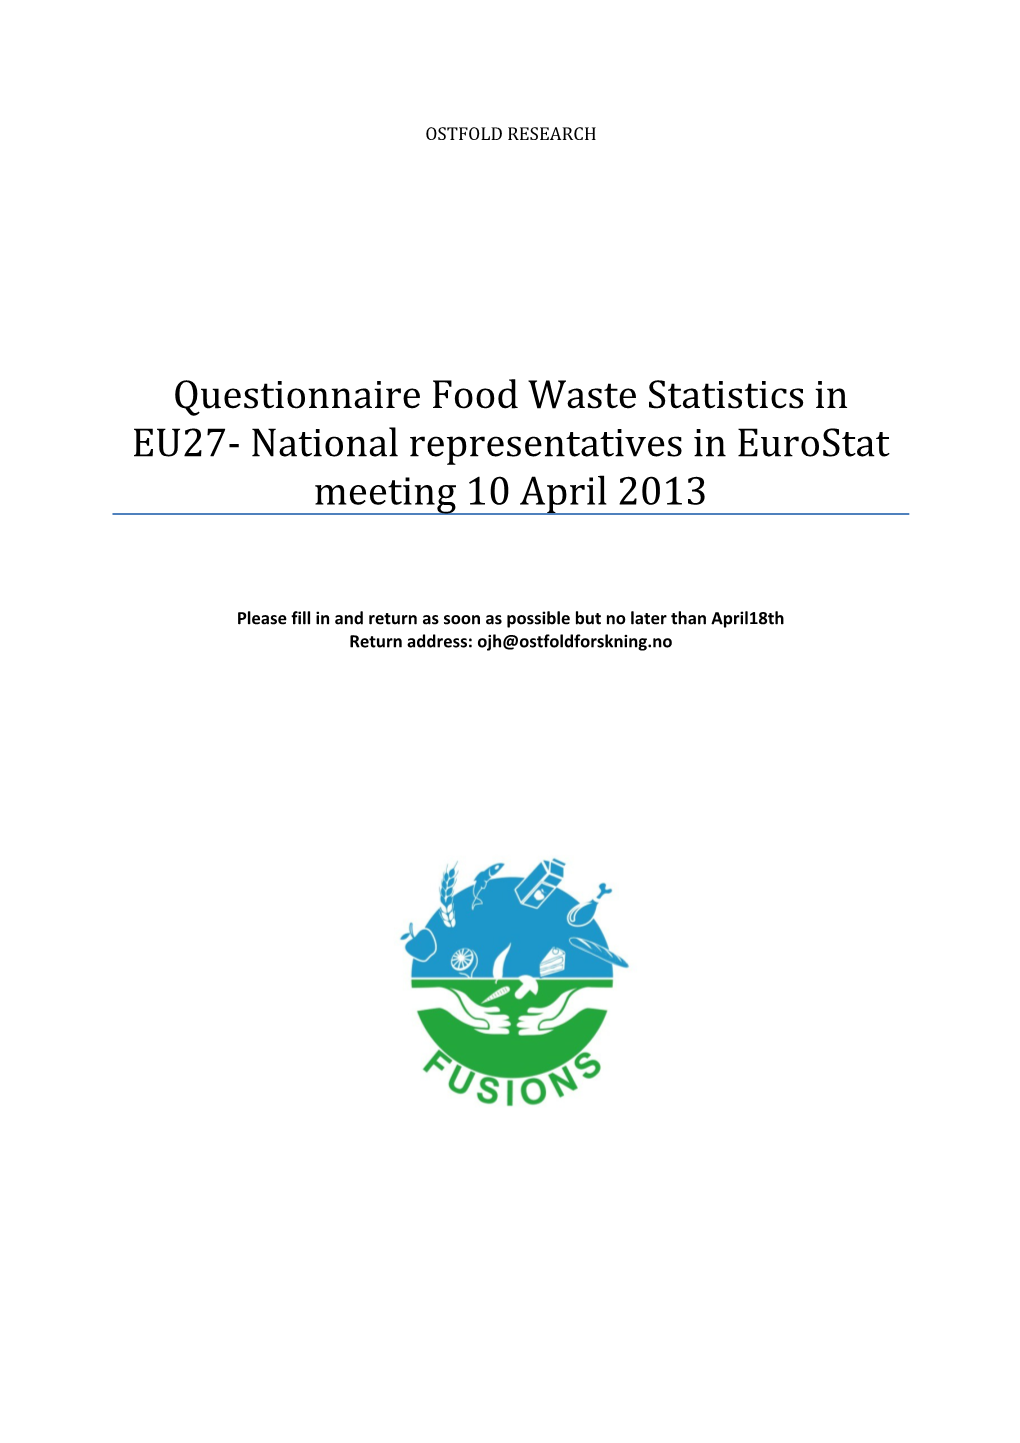 Questionnaire Food Waste Statistics in EU27- National Representatives in Eurostat Meeting